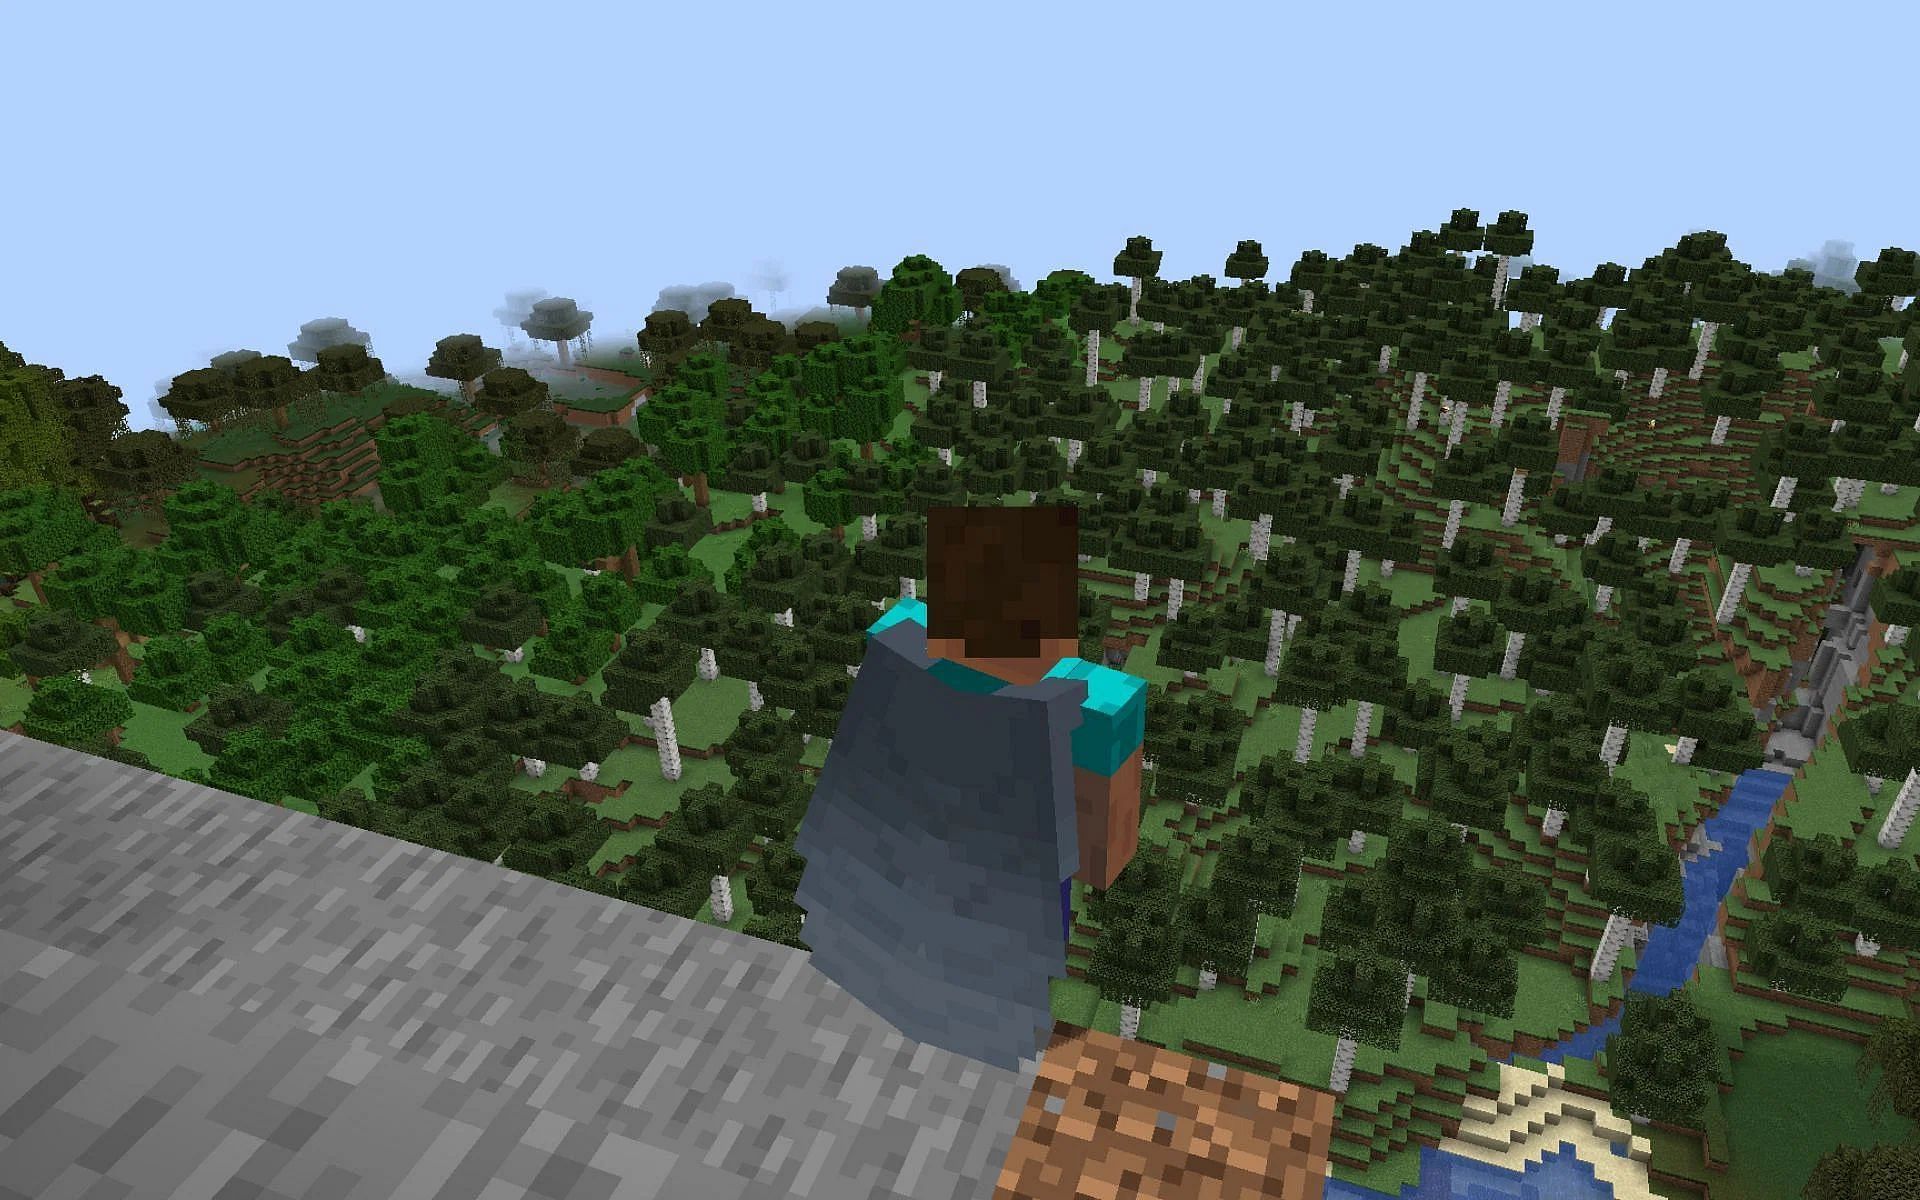 Elytra helps players glide and fly in the world (Image via Mojang)